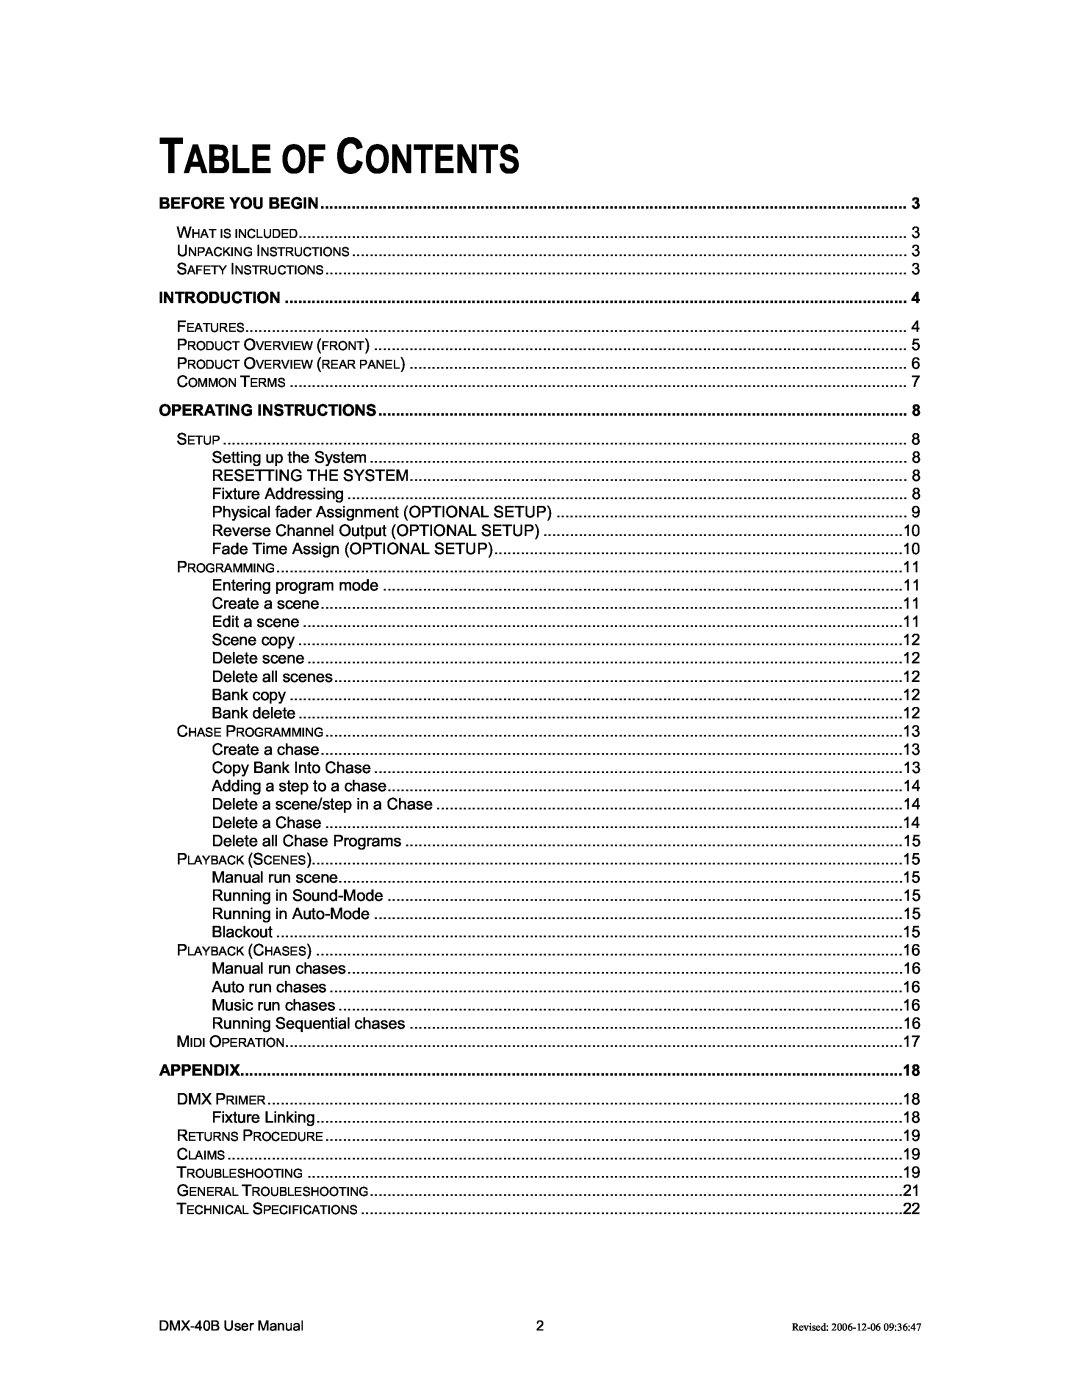 Chauvet DMX-40B user manual Table Of Contents, Before You Begin, Introduction, Operating Instructions, Appendix 